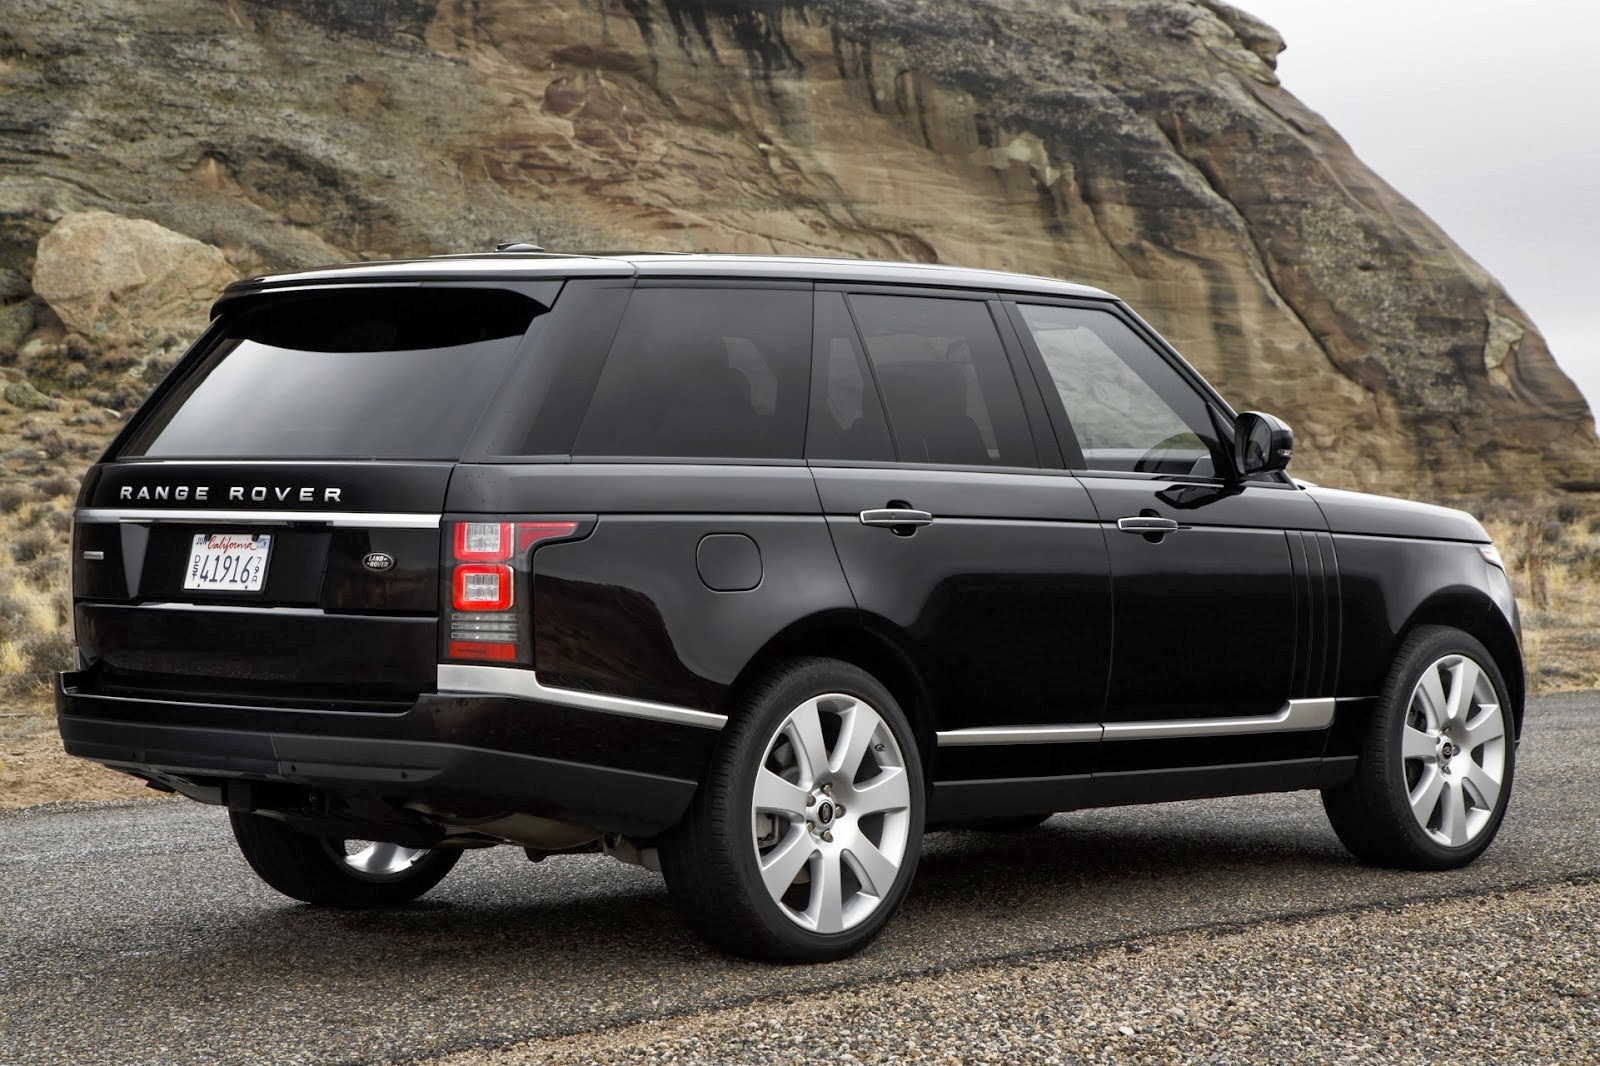 Range Rover Autobiography Edition Prices, Photos | Welcome Cars